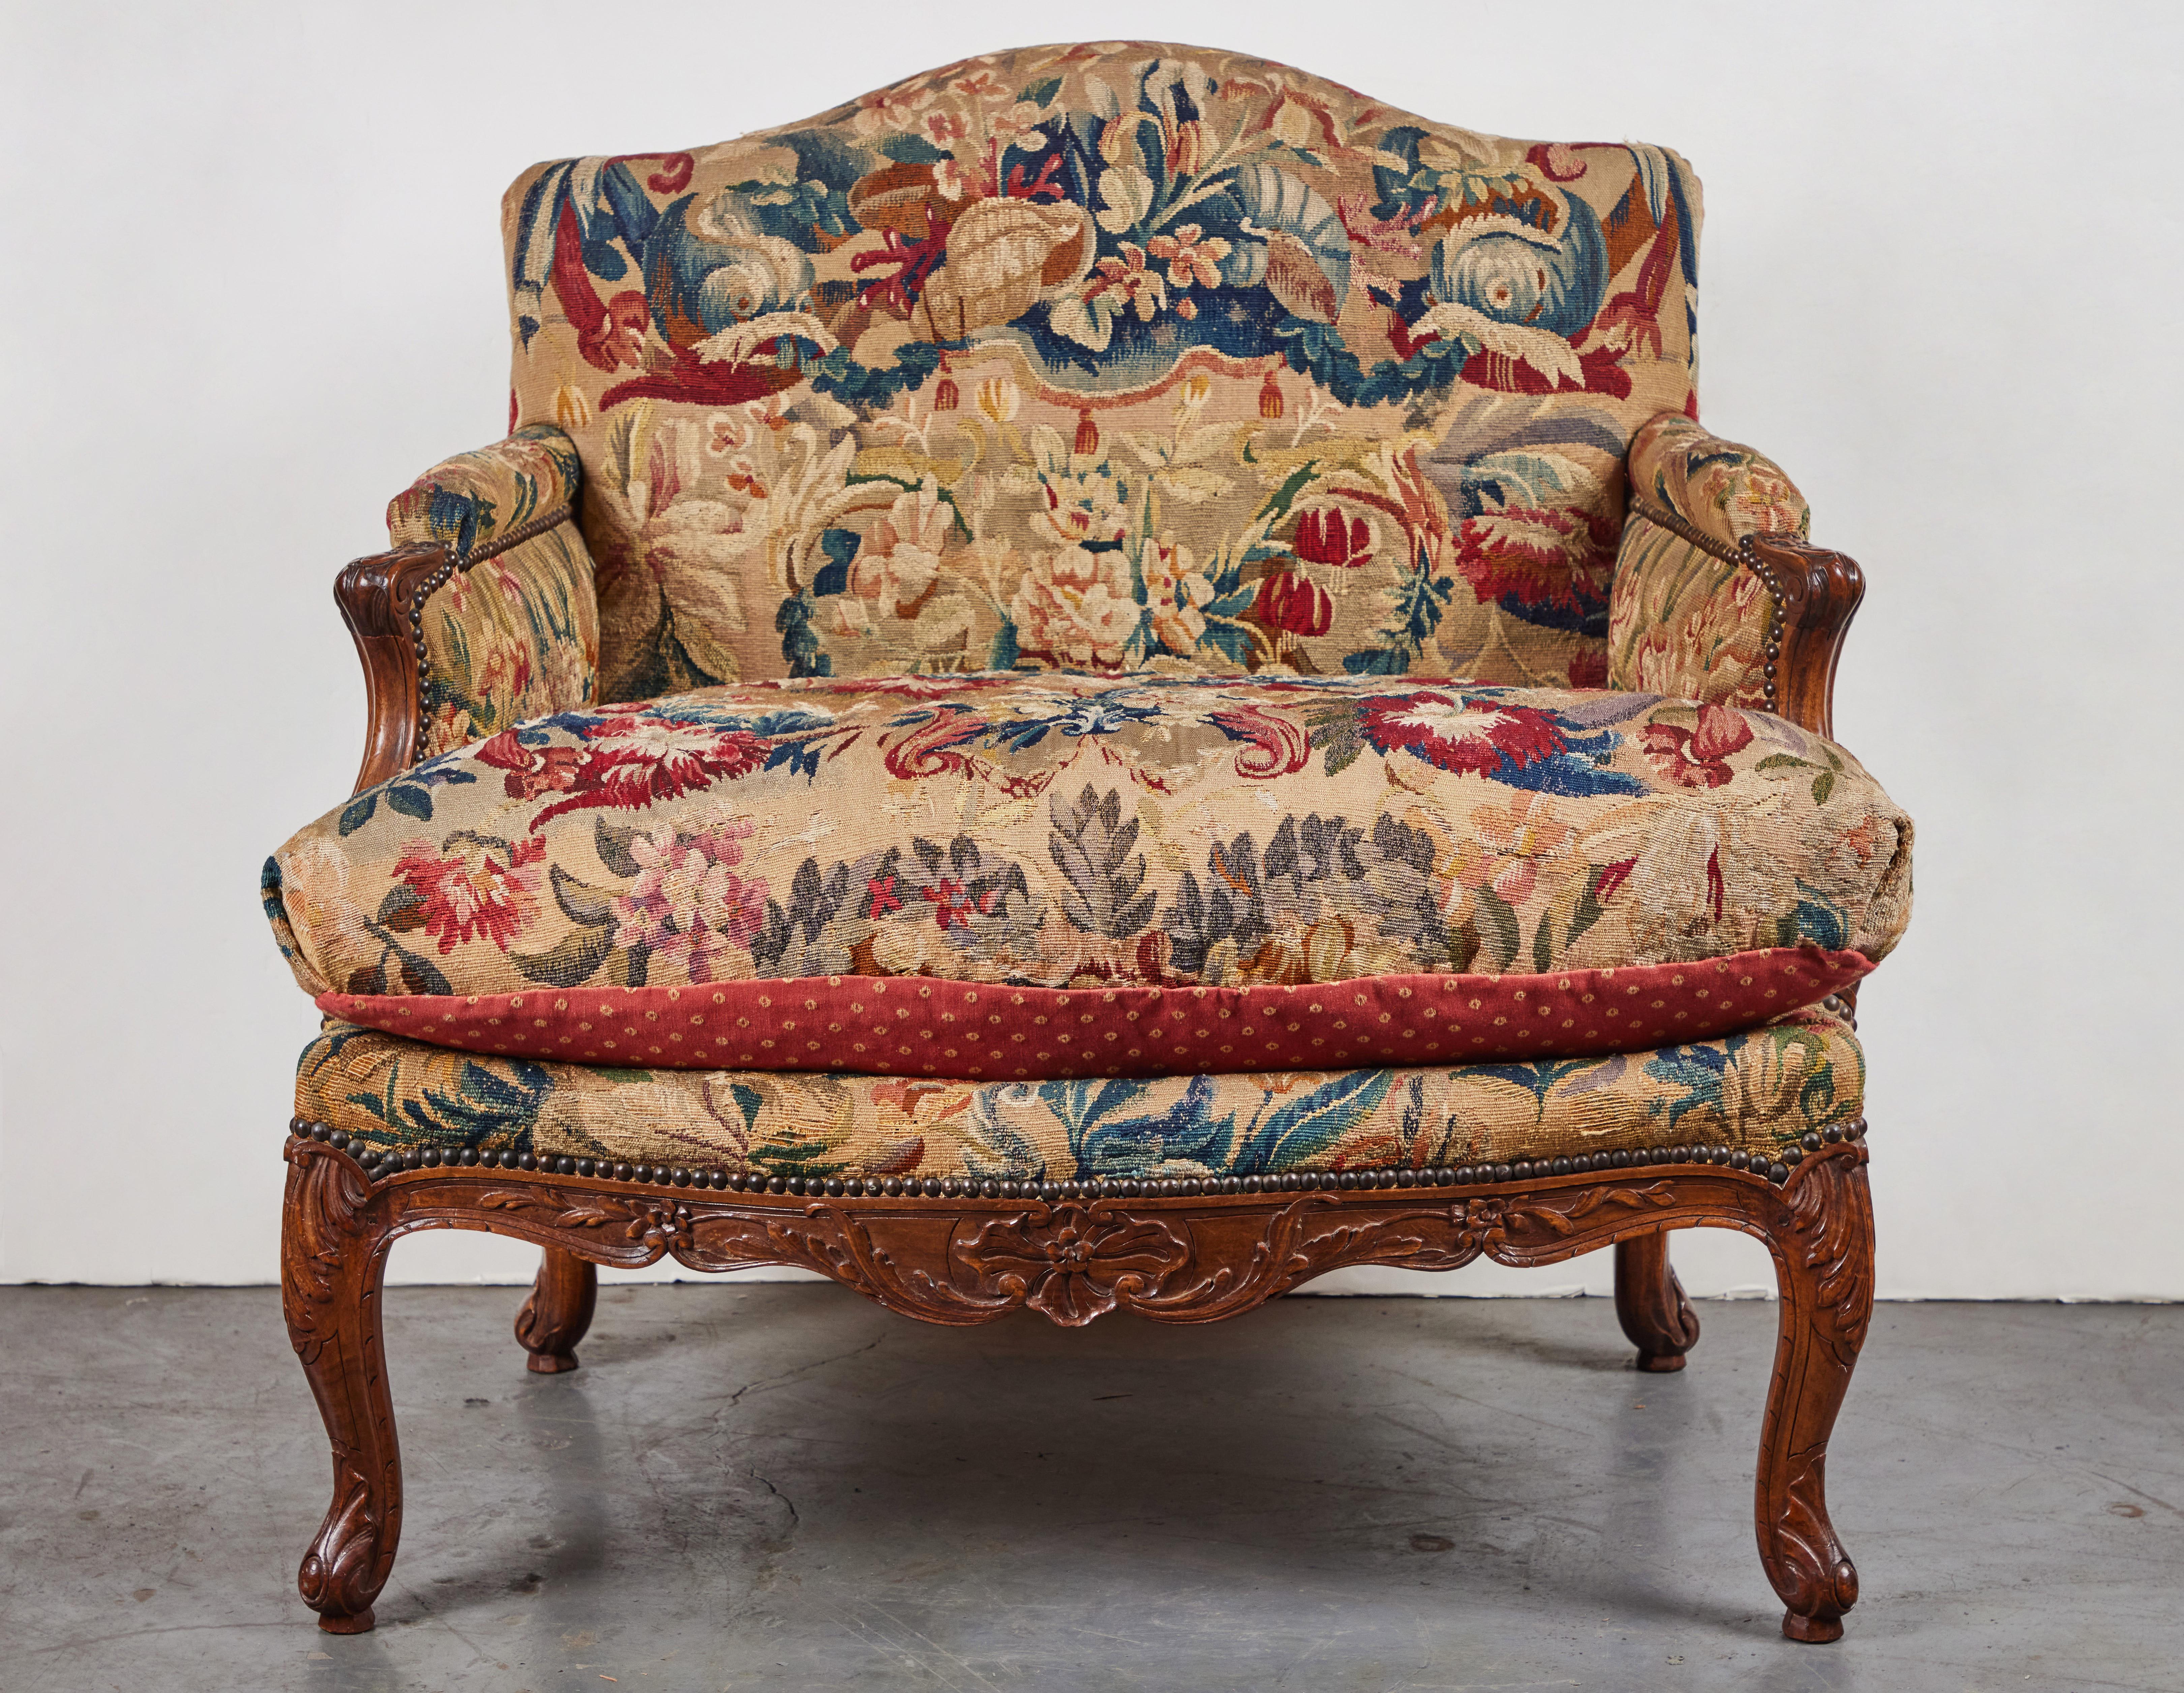 An exceptional pair of period, hand-carved walnut, Provencal marquis chairs in dramatic hand-stitched, tapestry style fabric featuring flowers and leaves affixed by bronze nail heads throughout. The apron and arms embellished with foliate relief